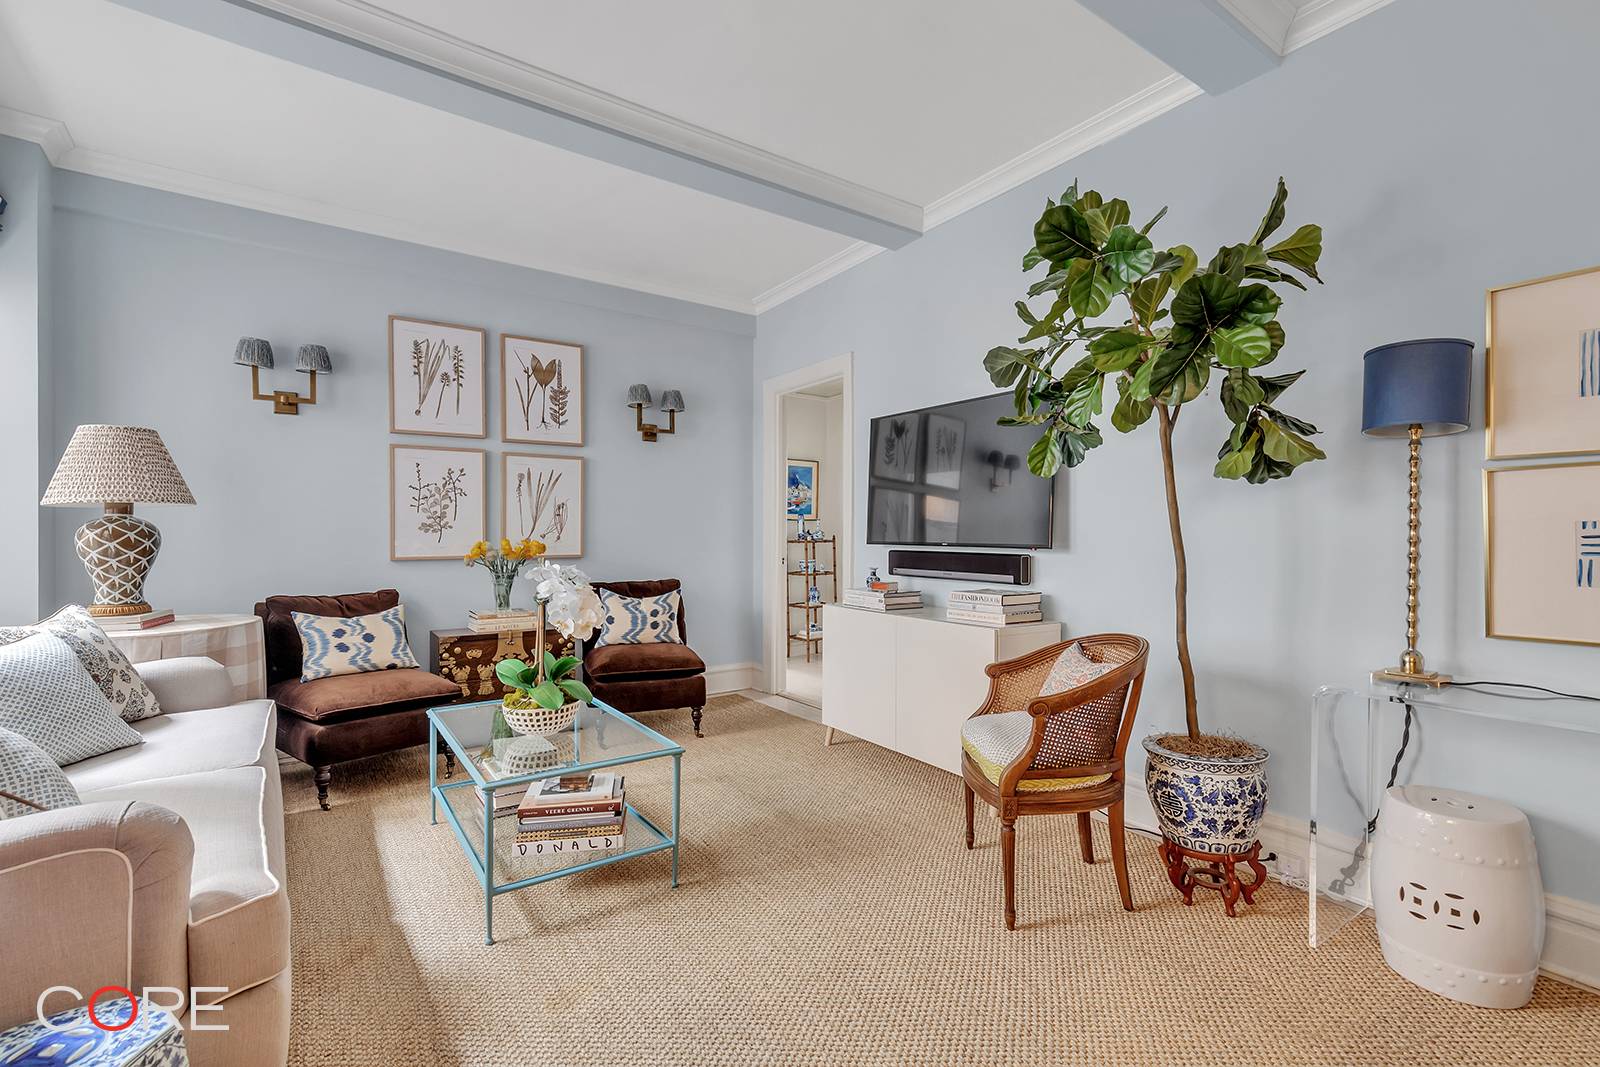 Impeccably designed and renovated, this beautifully proportioned and appointed boutique pre war two bedroom cooperative is the perfect place to call home.